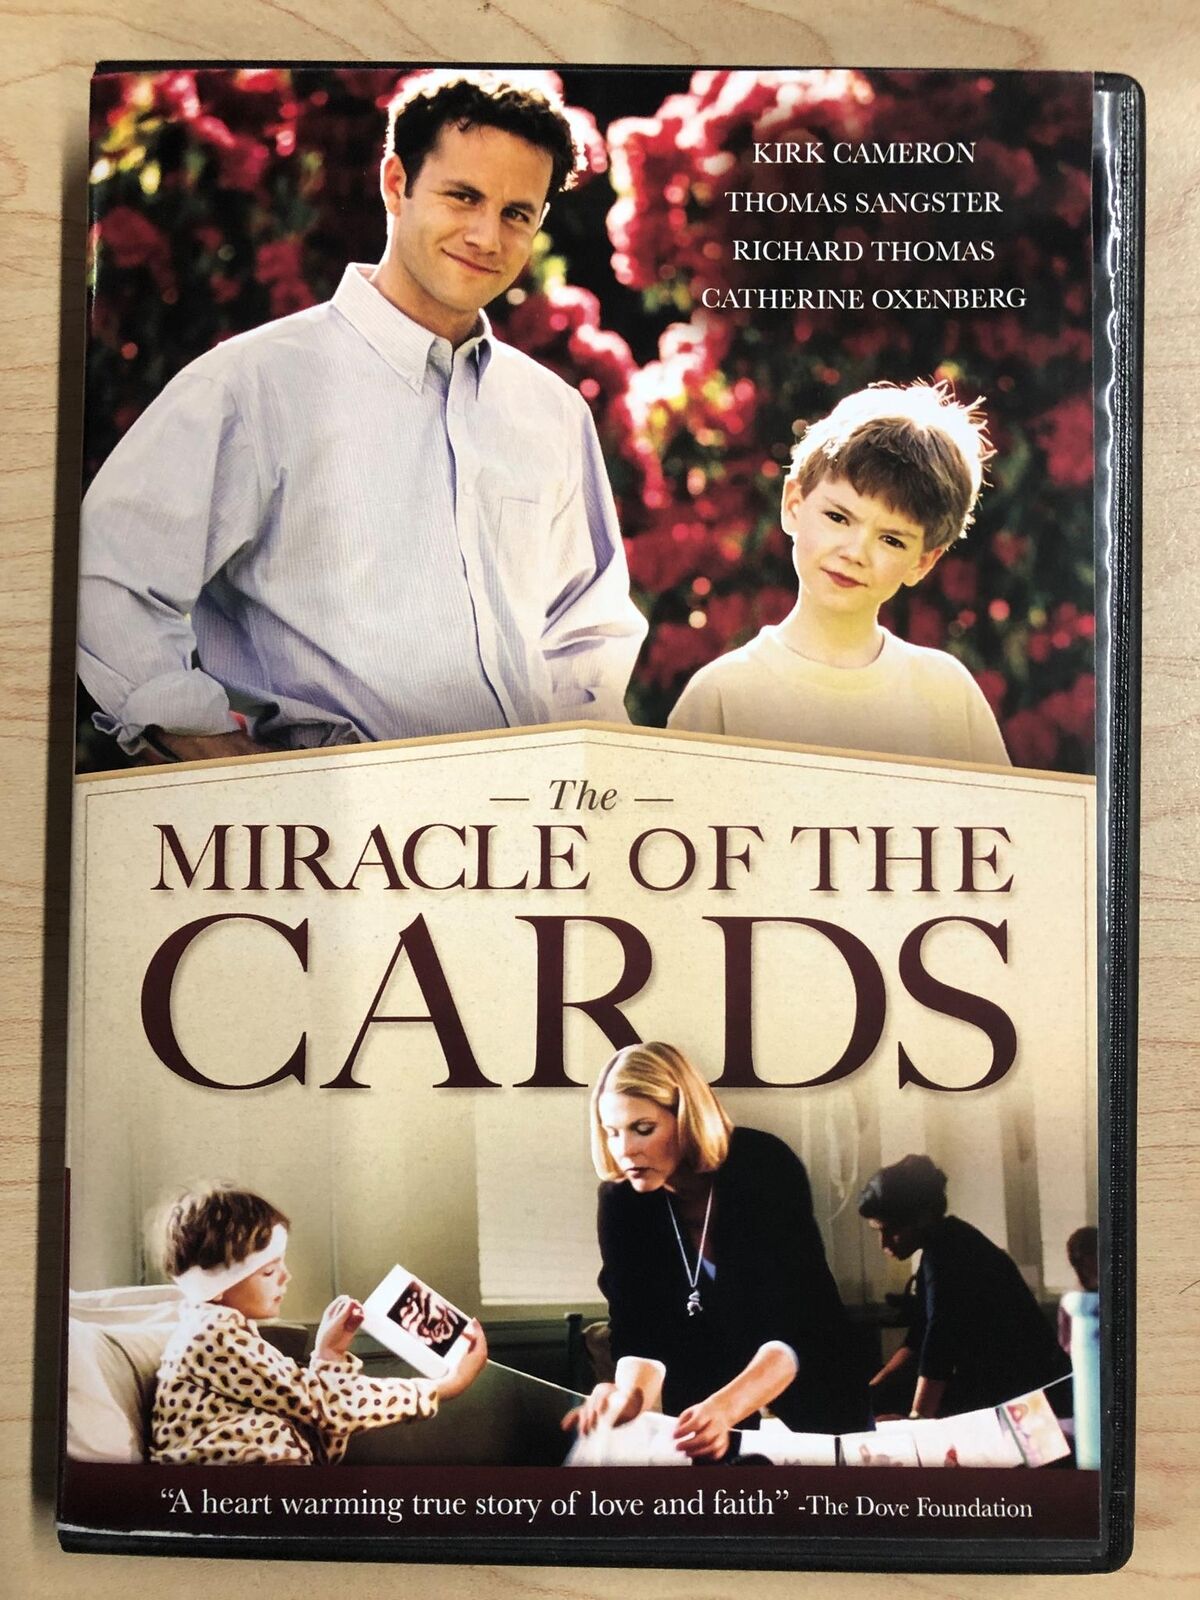 The Miracle of the Cards (DVD, 2001) - J0611